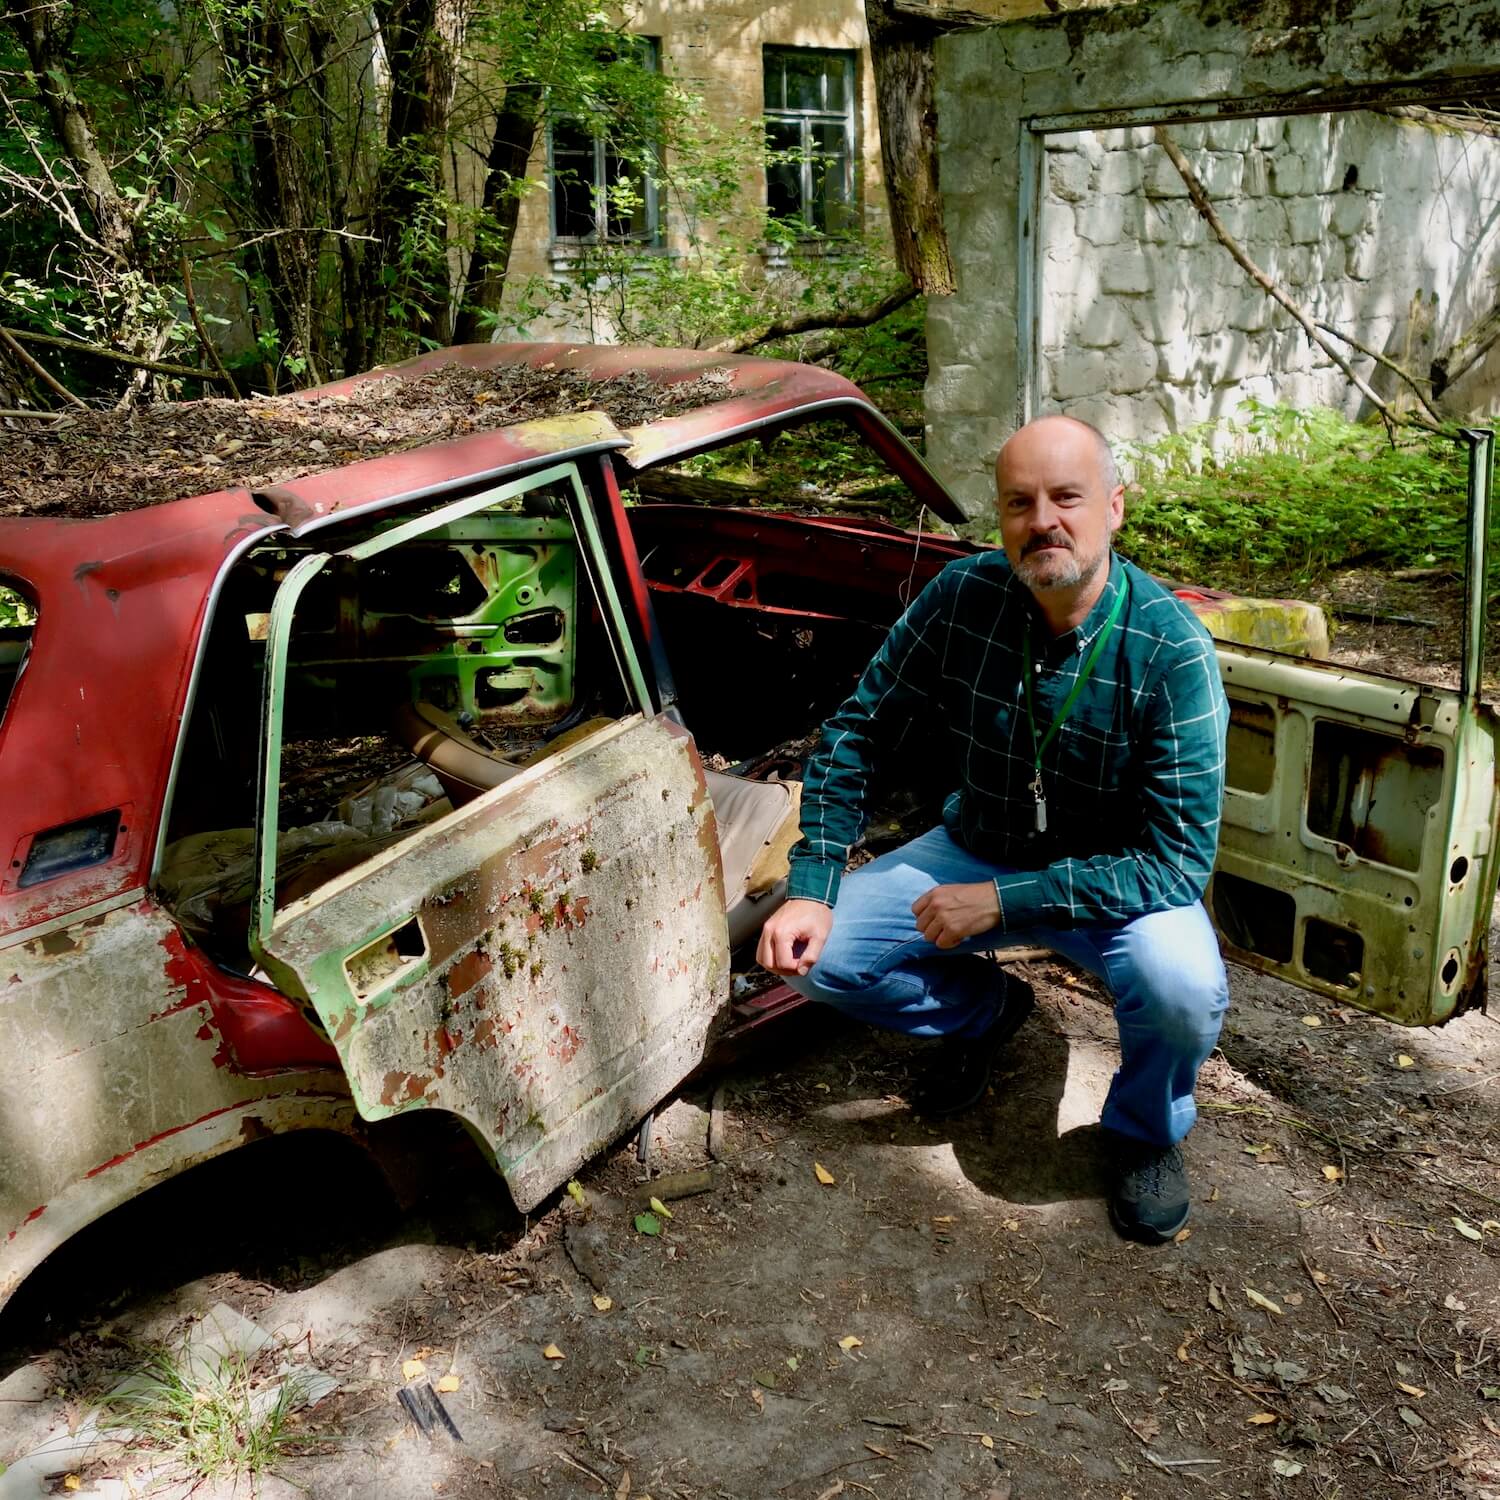 I am squatting next to an old Russian Lara car left behind after the Chernobyl explosion. This is located within the Chernobyl exclusion zone.